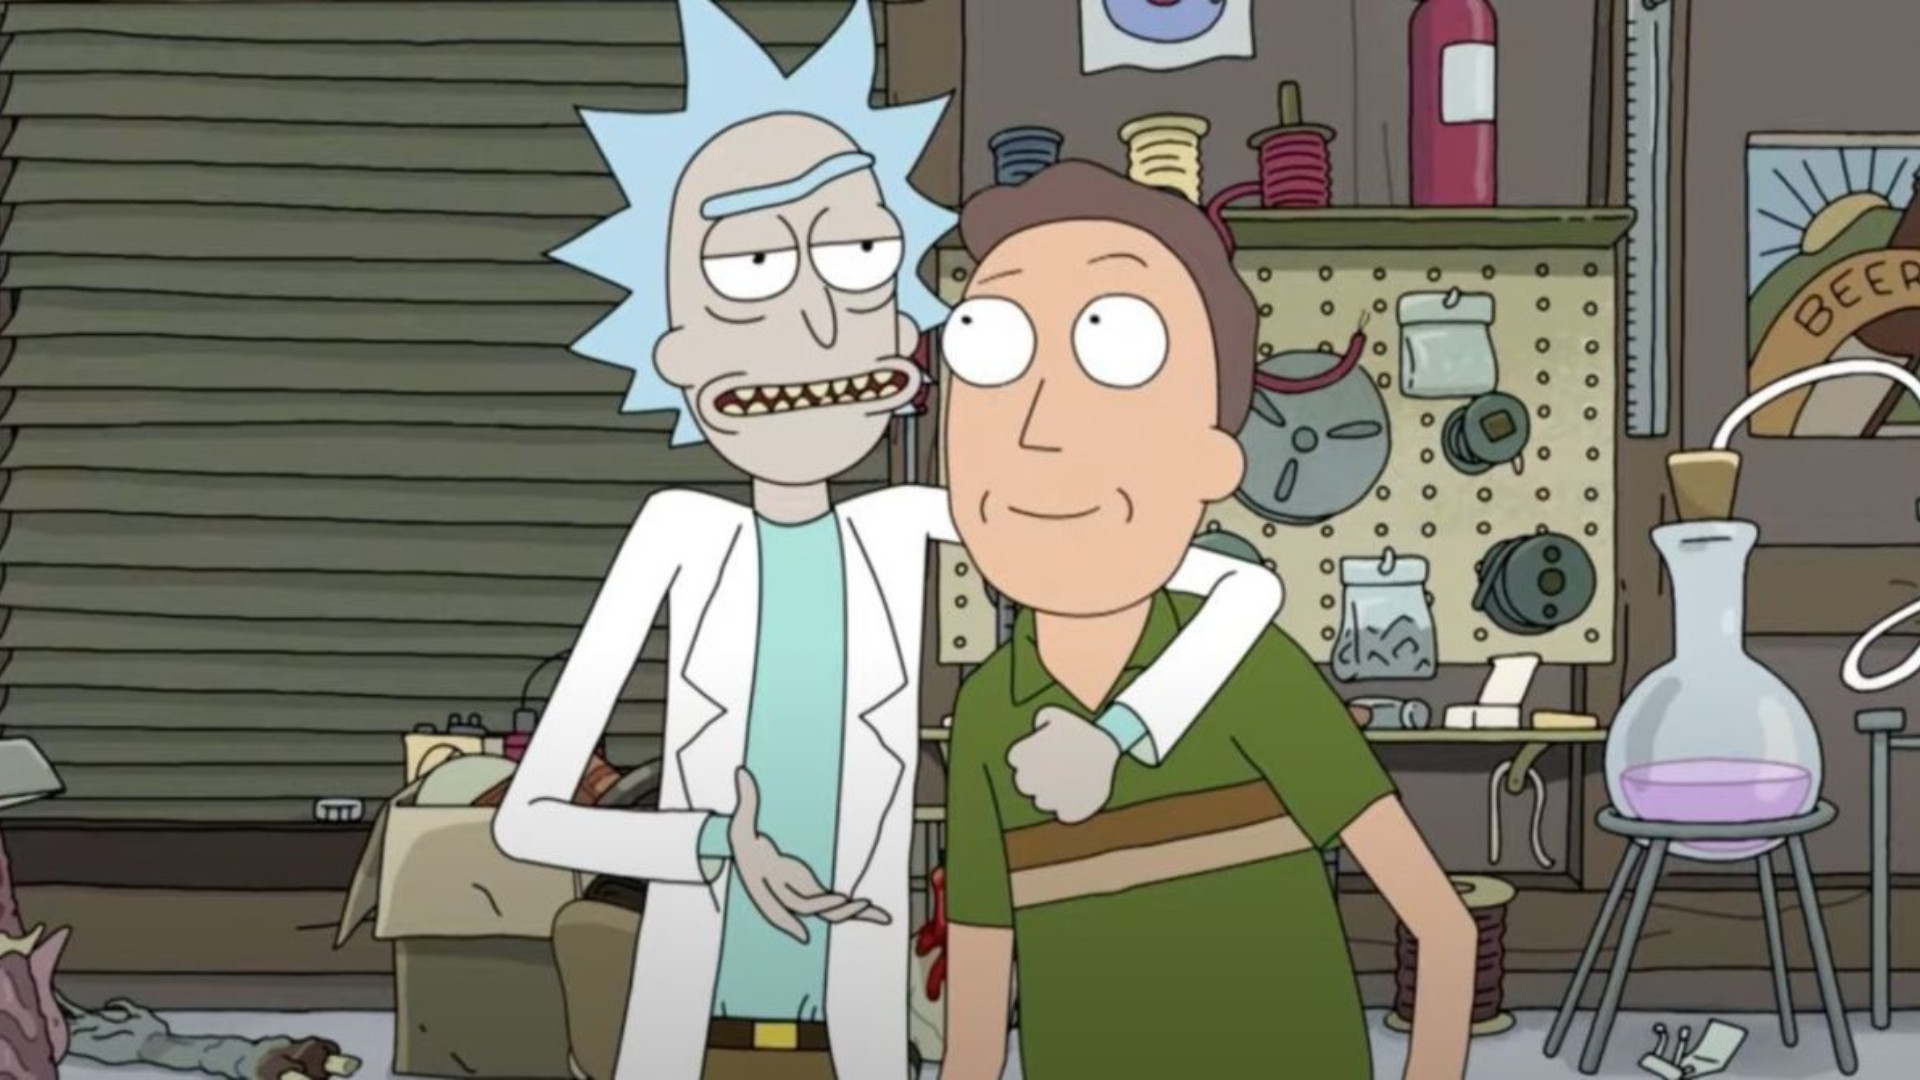 Rick and Morty is getting an anime spin-off series